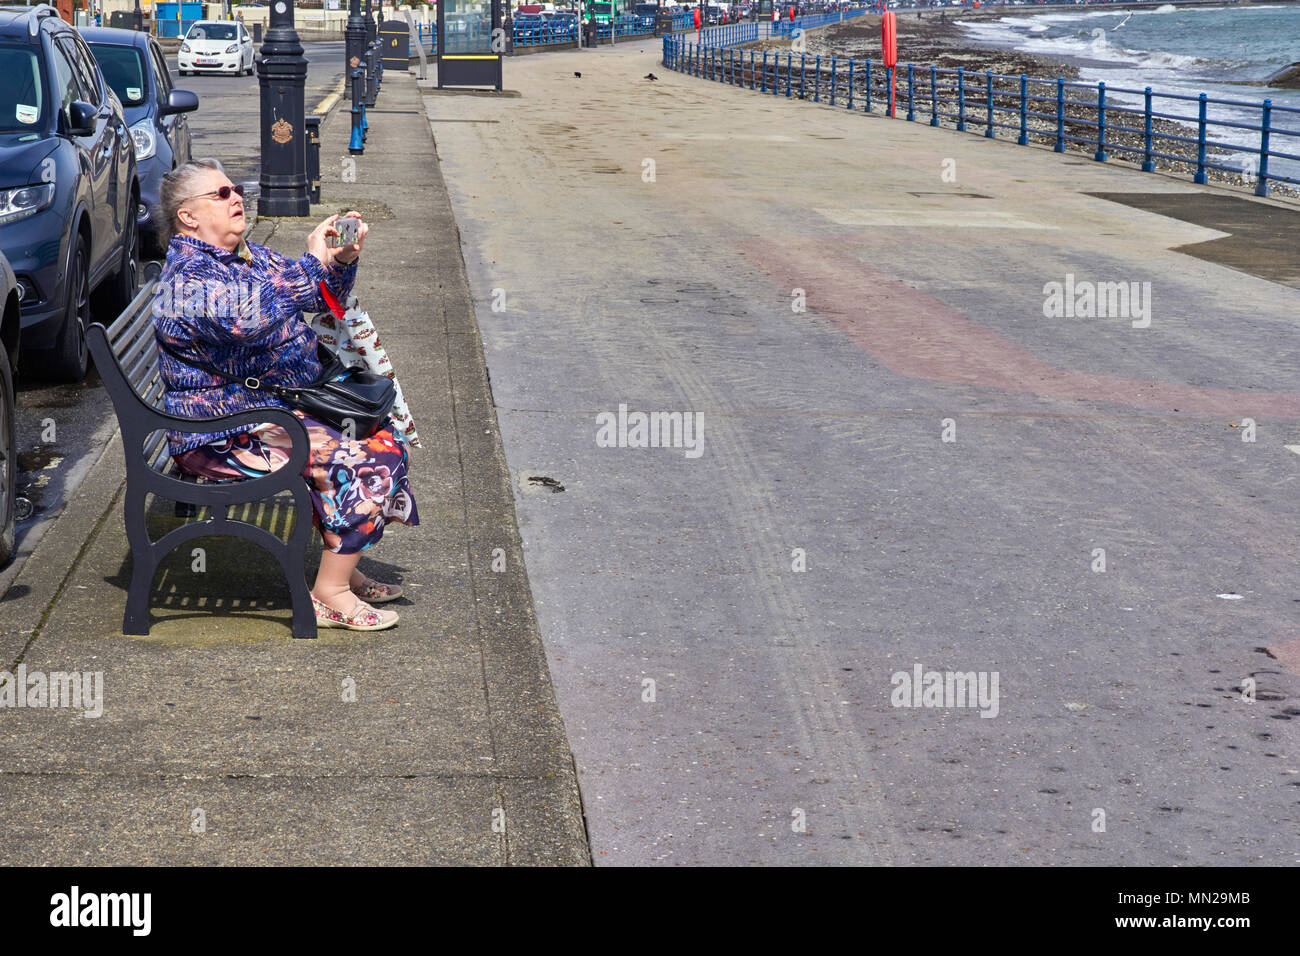 Older woman sitting on a seaside bench taking a photo with phone camera Stock Photo